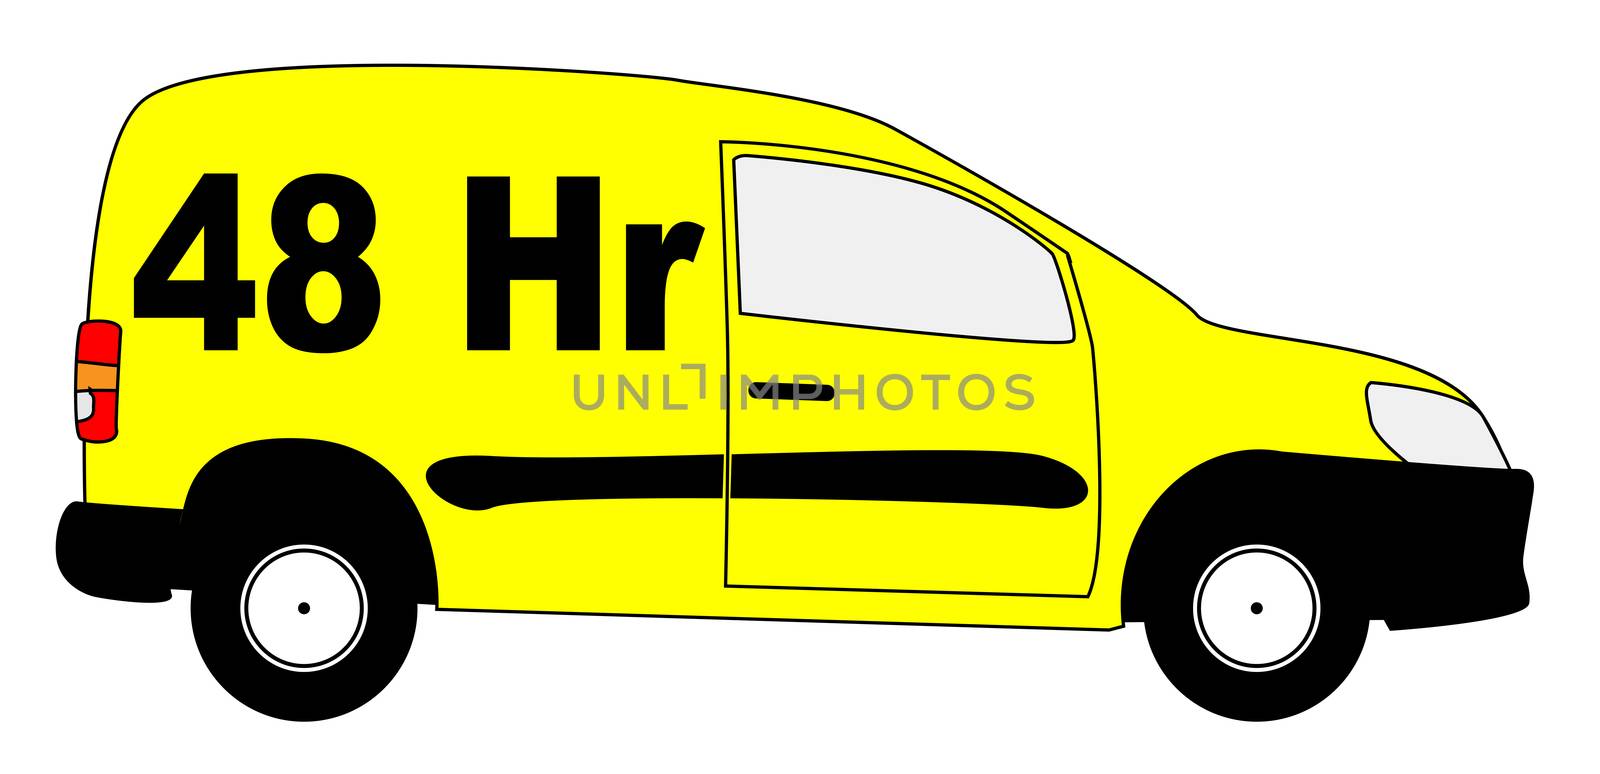 A small delivery van with text 48hr isolated on a white background